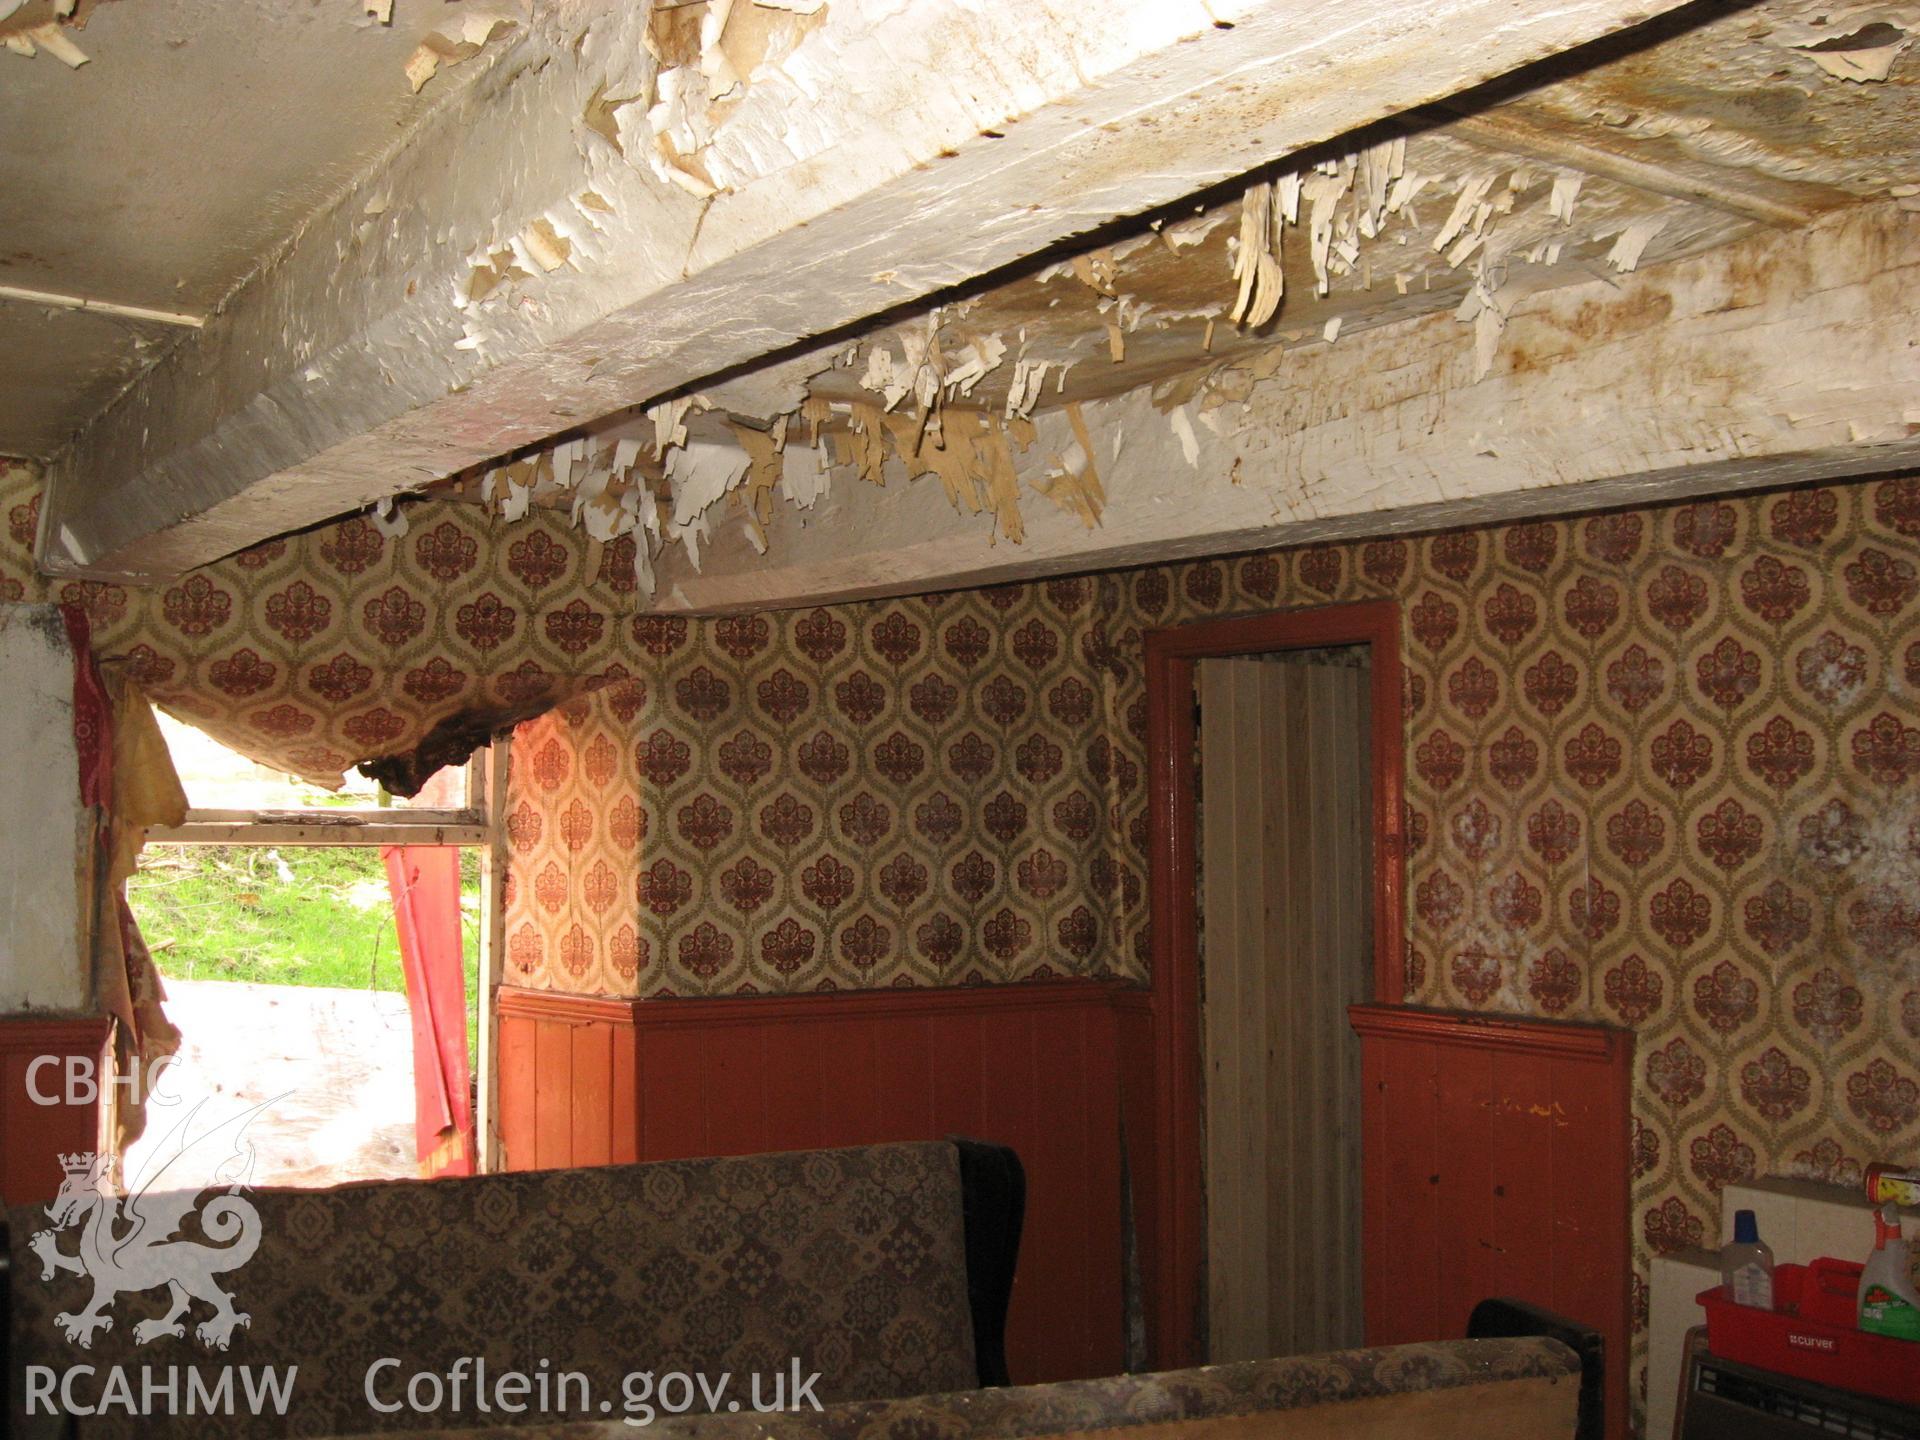 Colour photo showing interior view of the Fountain Inn, taken by Paul R. Davis and dated 2nd February 2013.